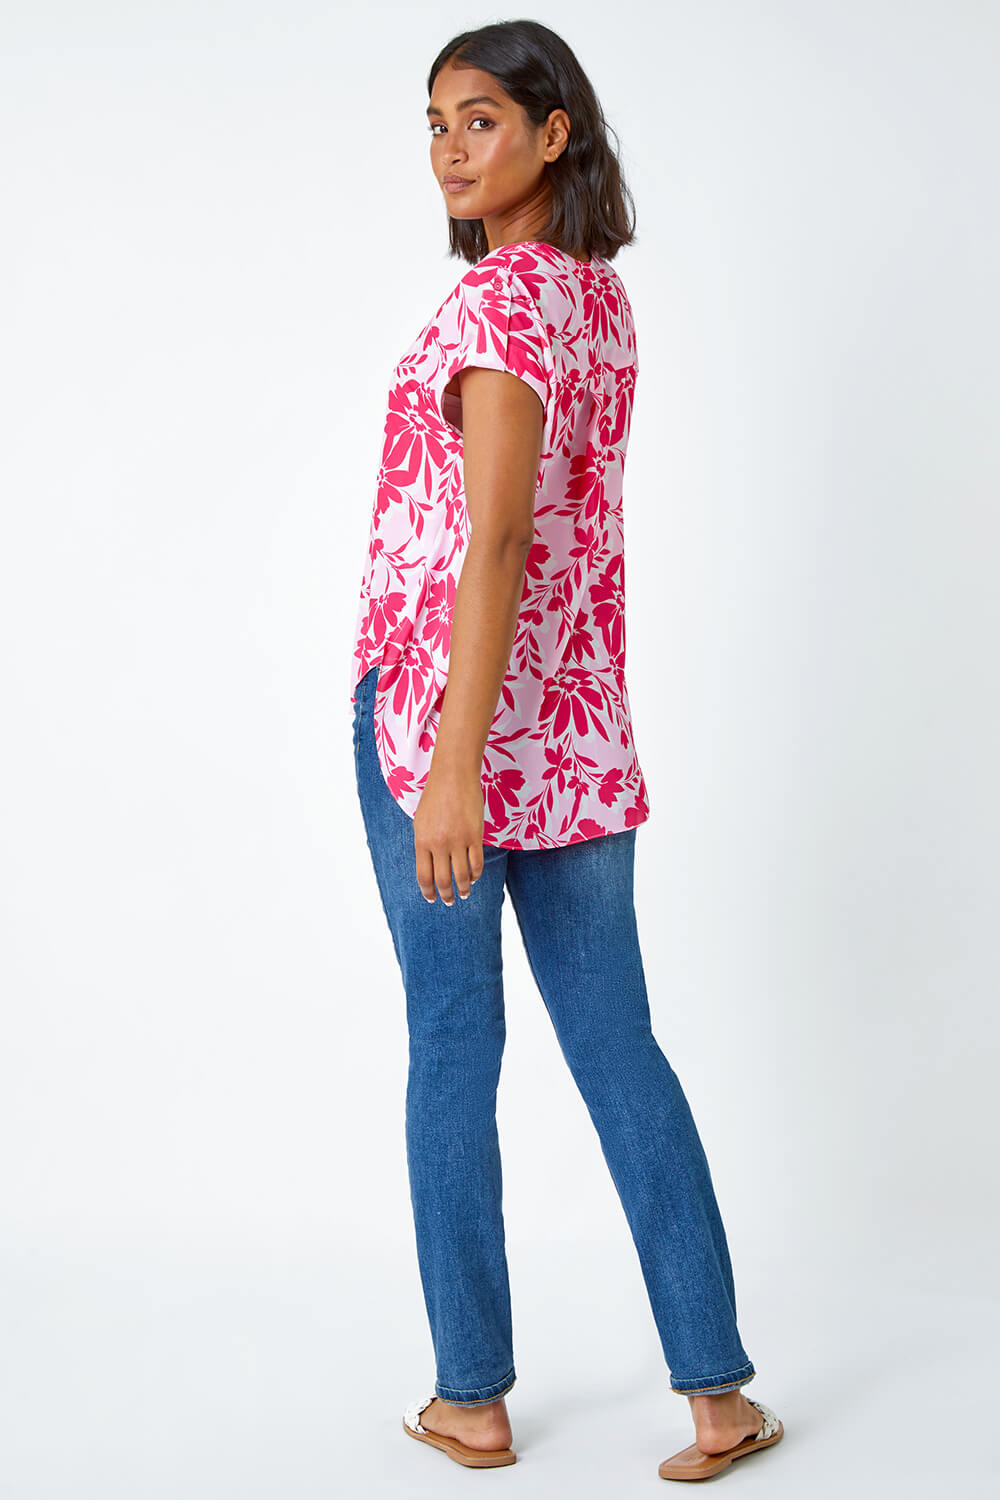 PINK Floral Print Pleat Front Top, Image 3 of 5